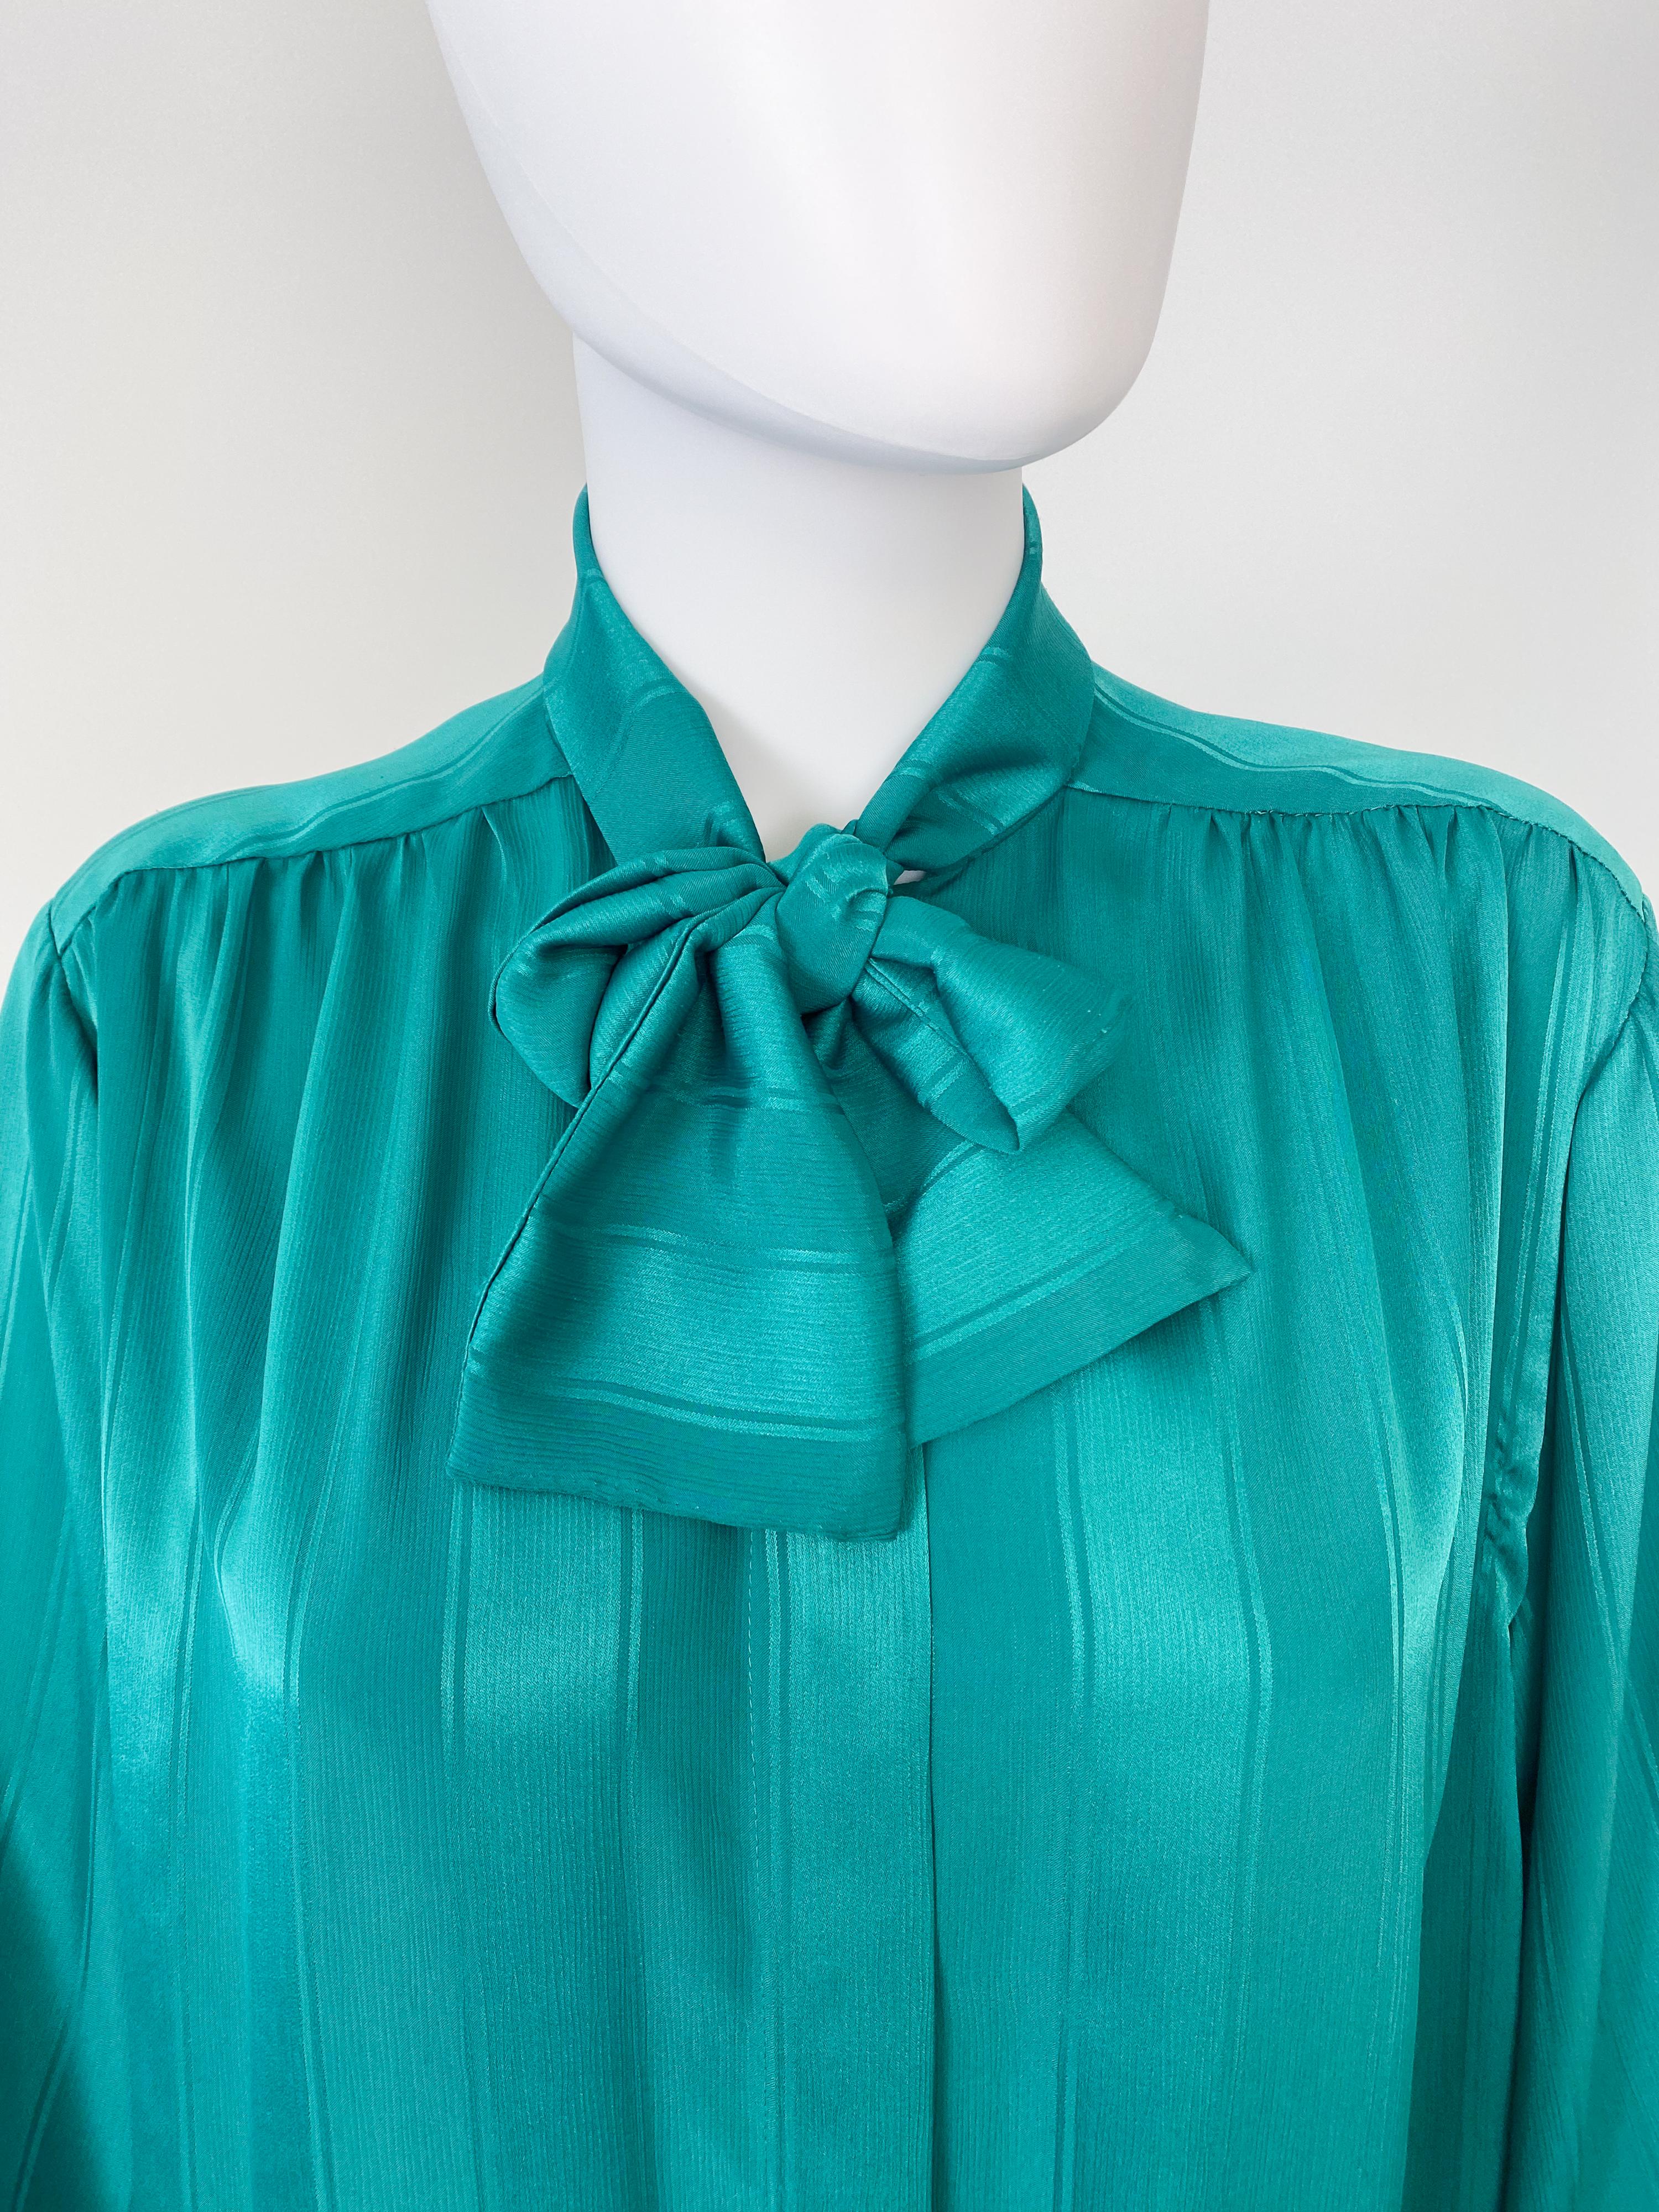 Women's or Men's Vintage 1980s Silky Polyester Bow Blouse Top Emerald Green Stripes Size 12/14 For Sale